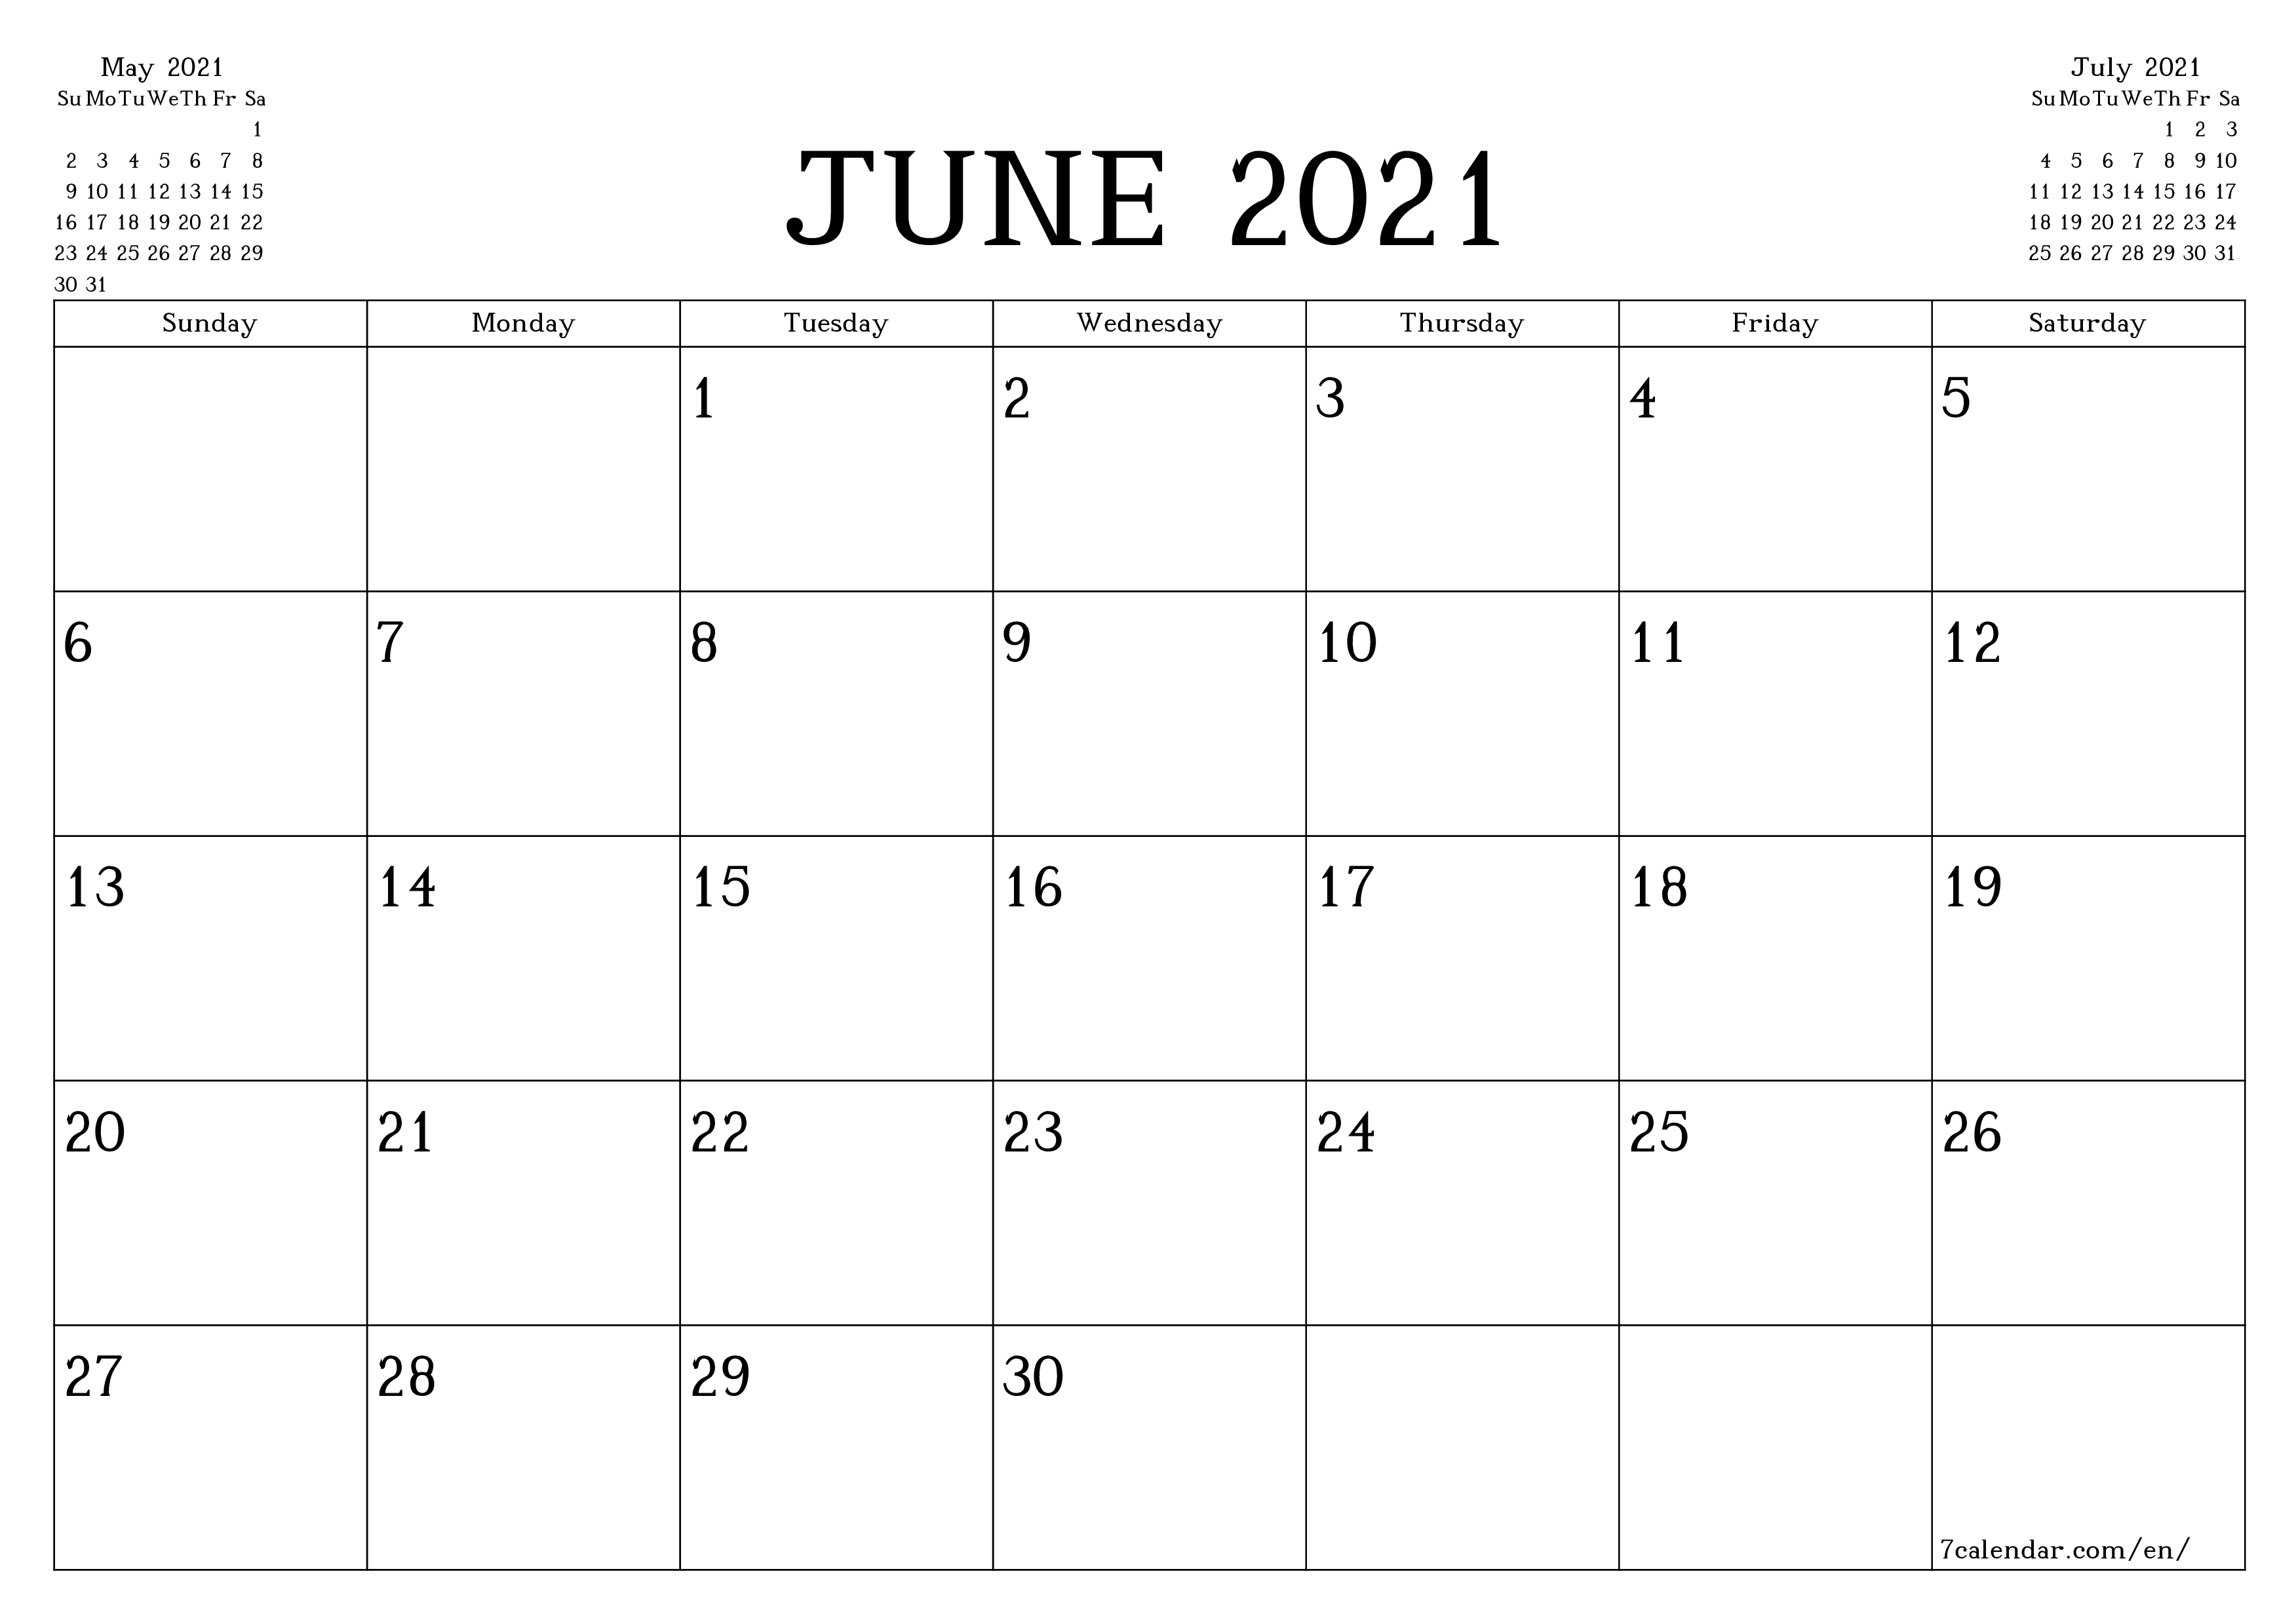 Blank monthly calendar planner for month June 2021 with notes save and print to PDF PNG English - 7calendar.com